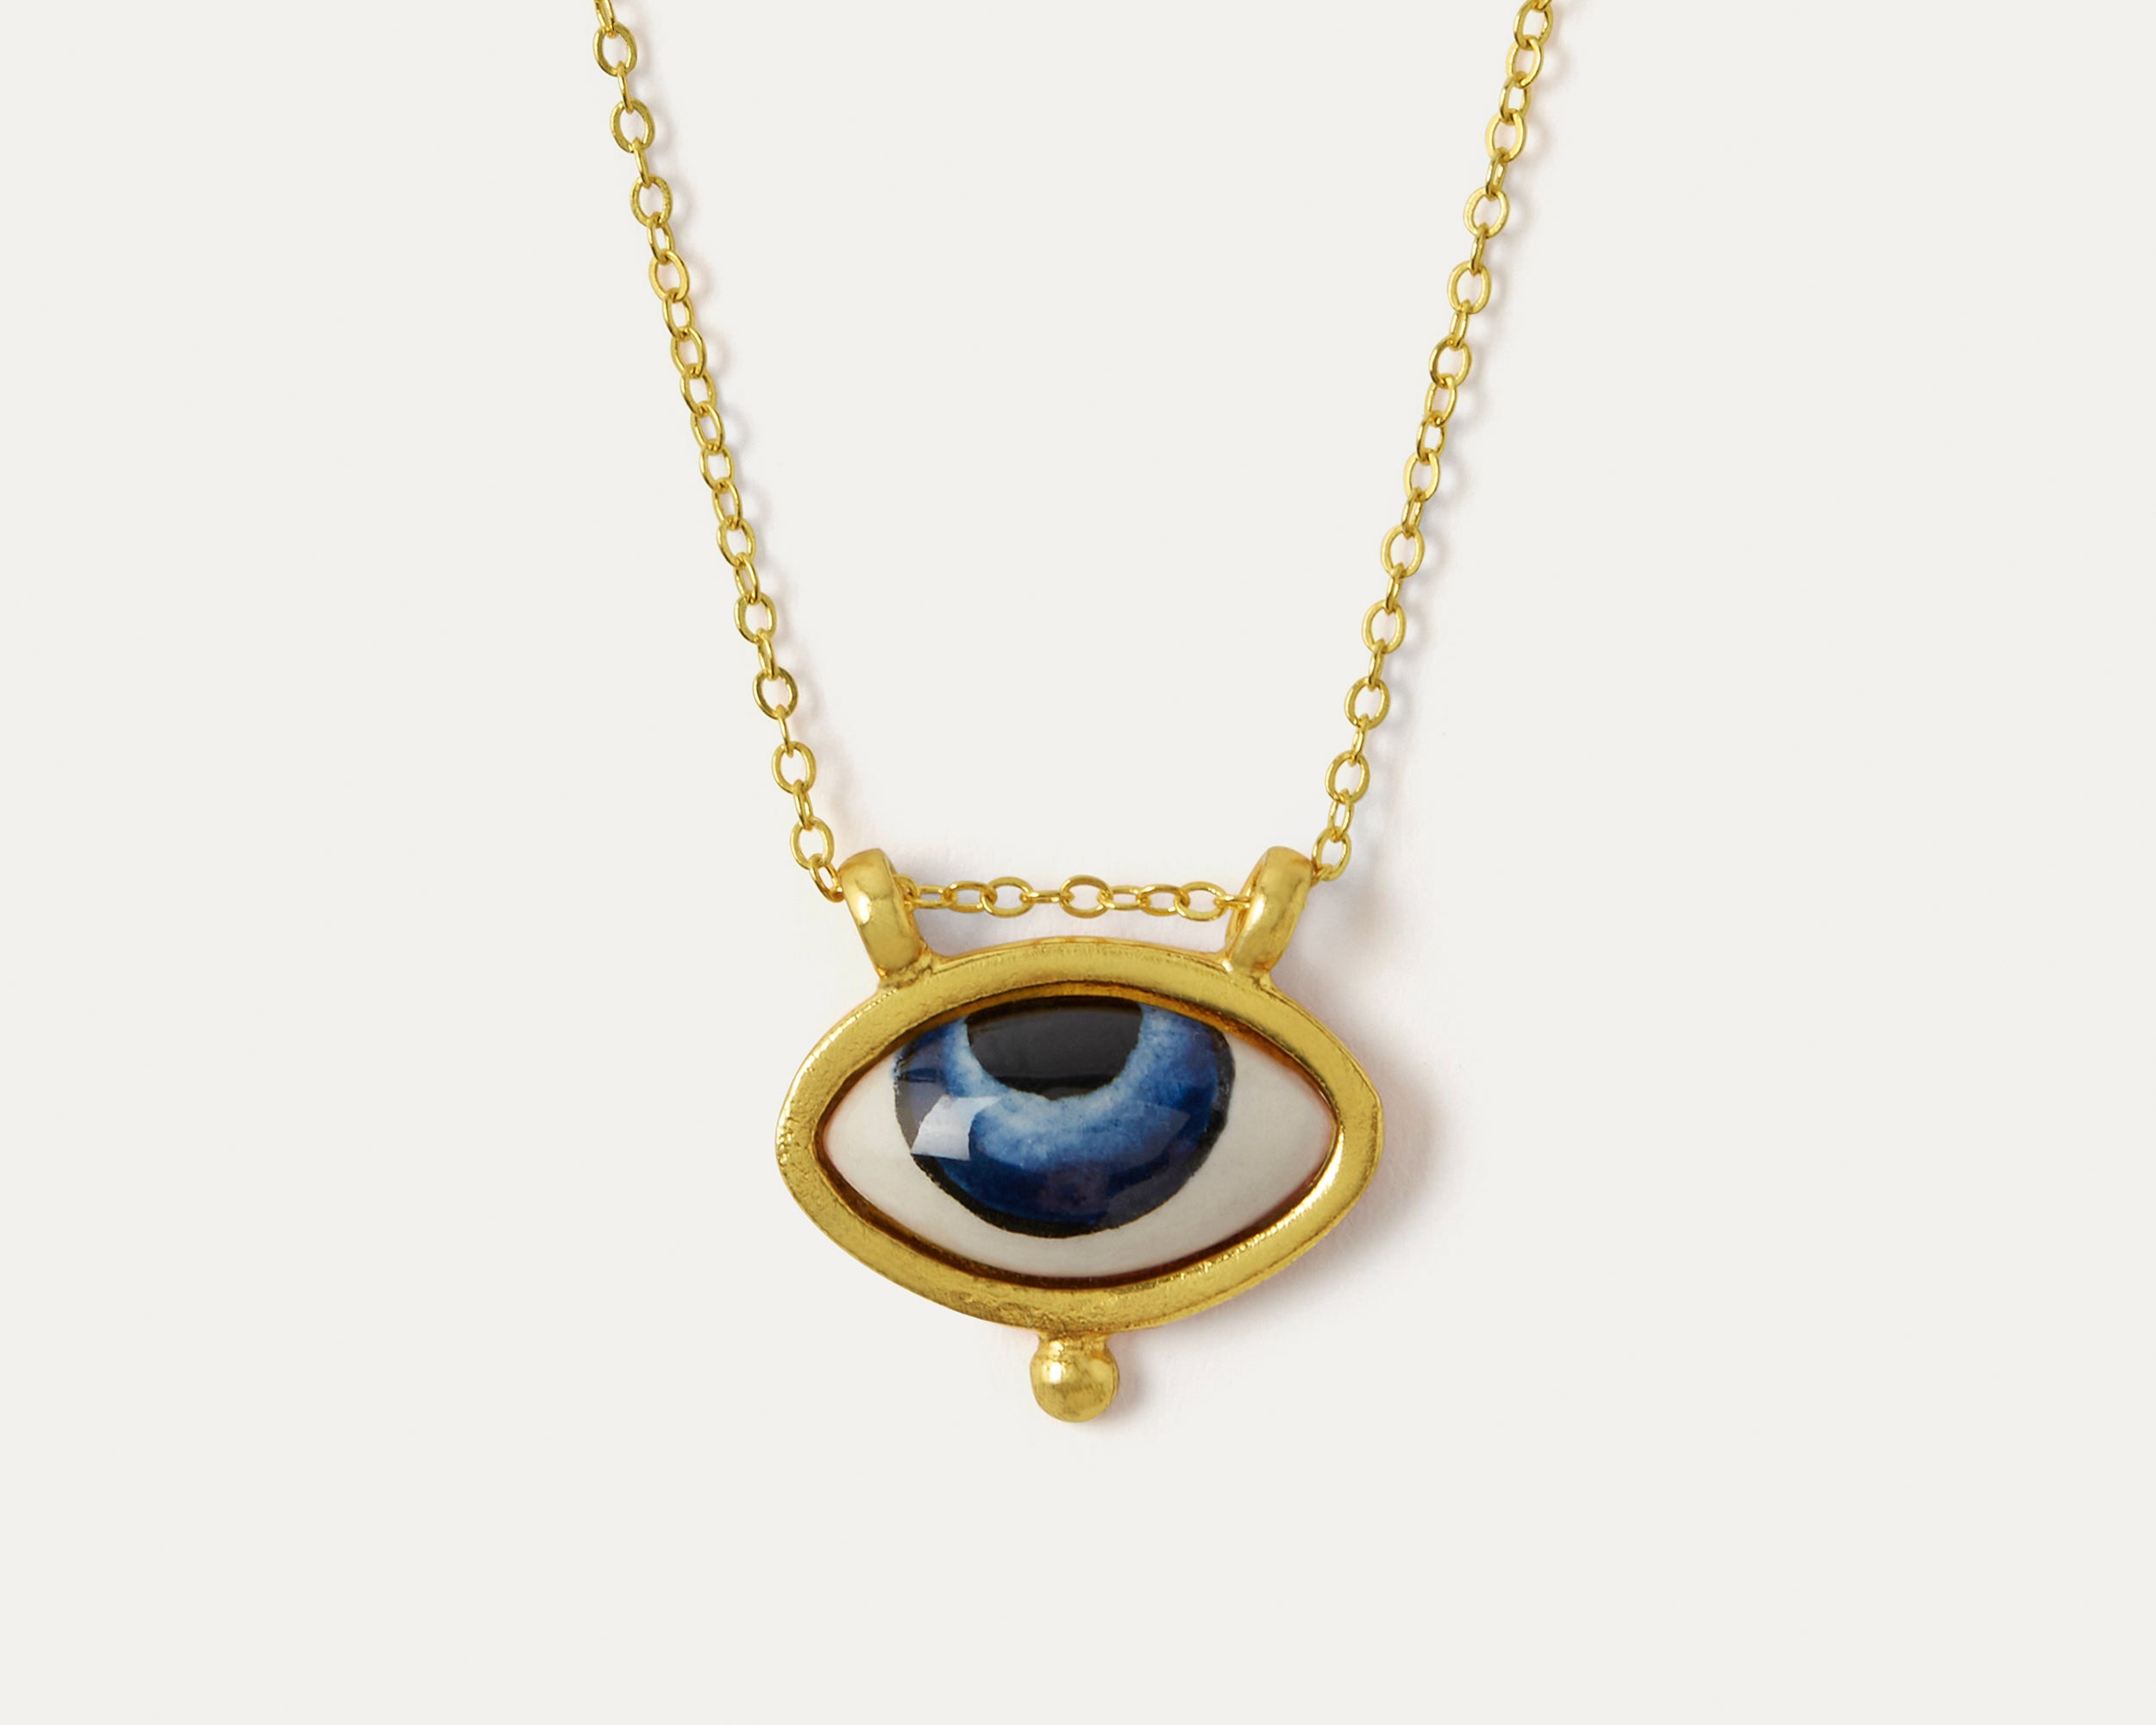 Adira Blue Porcelain Evil Eye Necklace | Sustainable Jewellery by Ottoman Hands